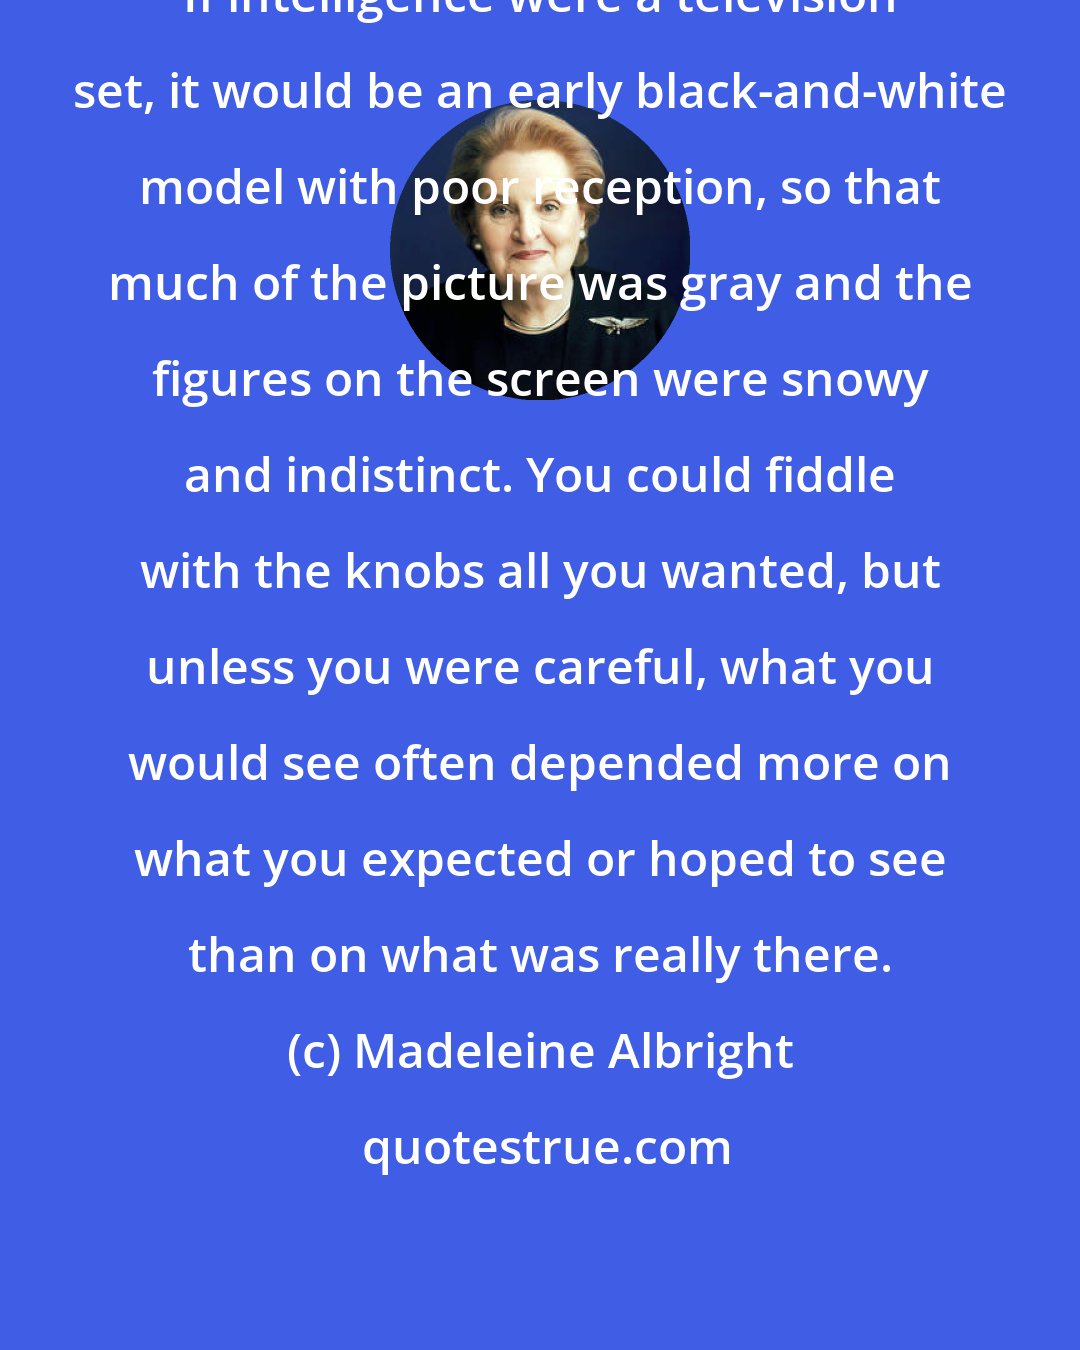 Madeleine Albright: If intelligence were a television set, it would be an early black-and-white model with poor reception, so that much of the picture was gray and the figures on the screen were snowy and indistinct. You could fiddle with the knobs all you wanted, but unless you were careful, what you would see often depended more on what you expected or hoped to see than on what was really there.